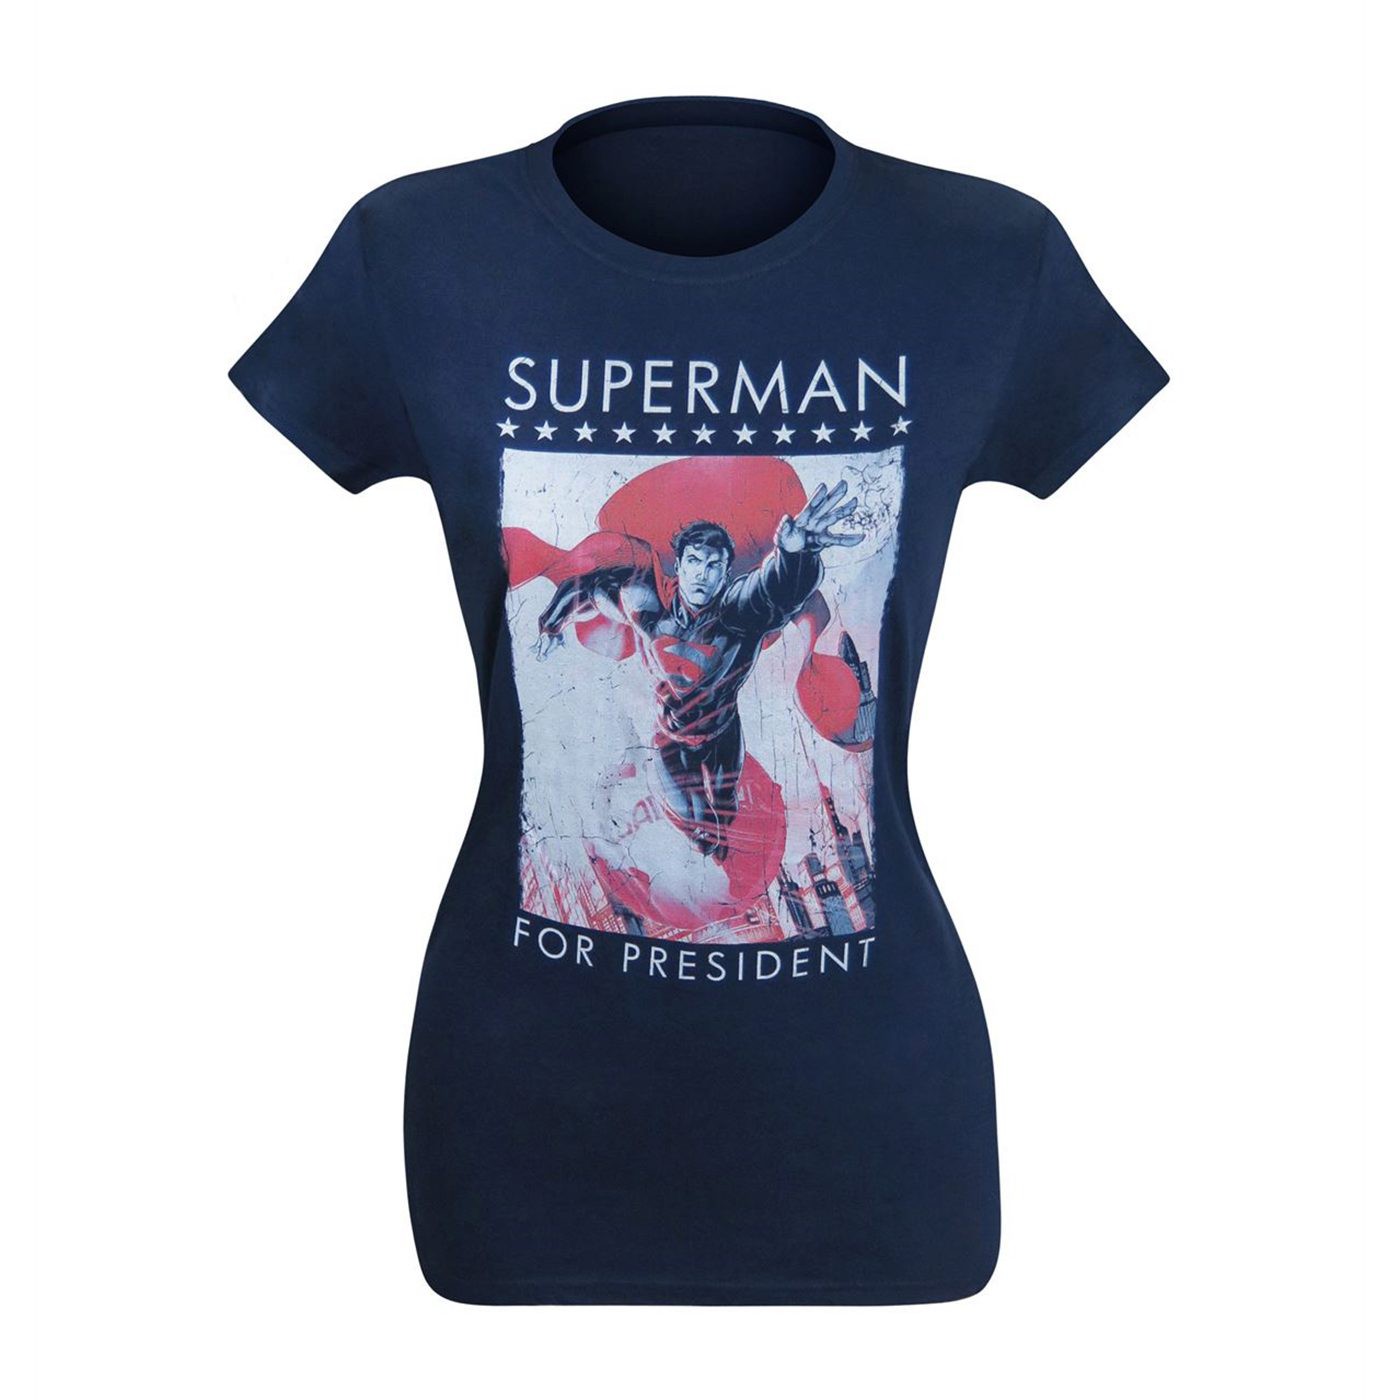 Superman for President Clouds Women's T-Shirt